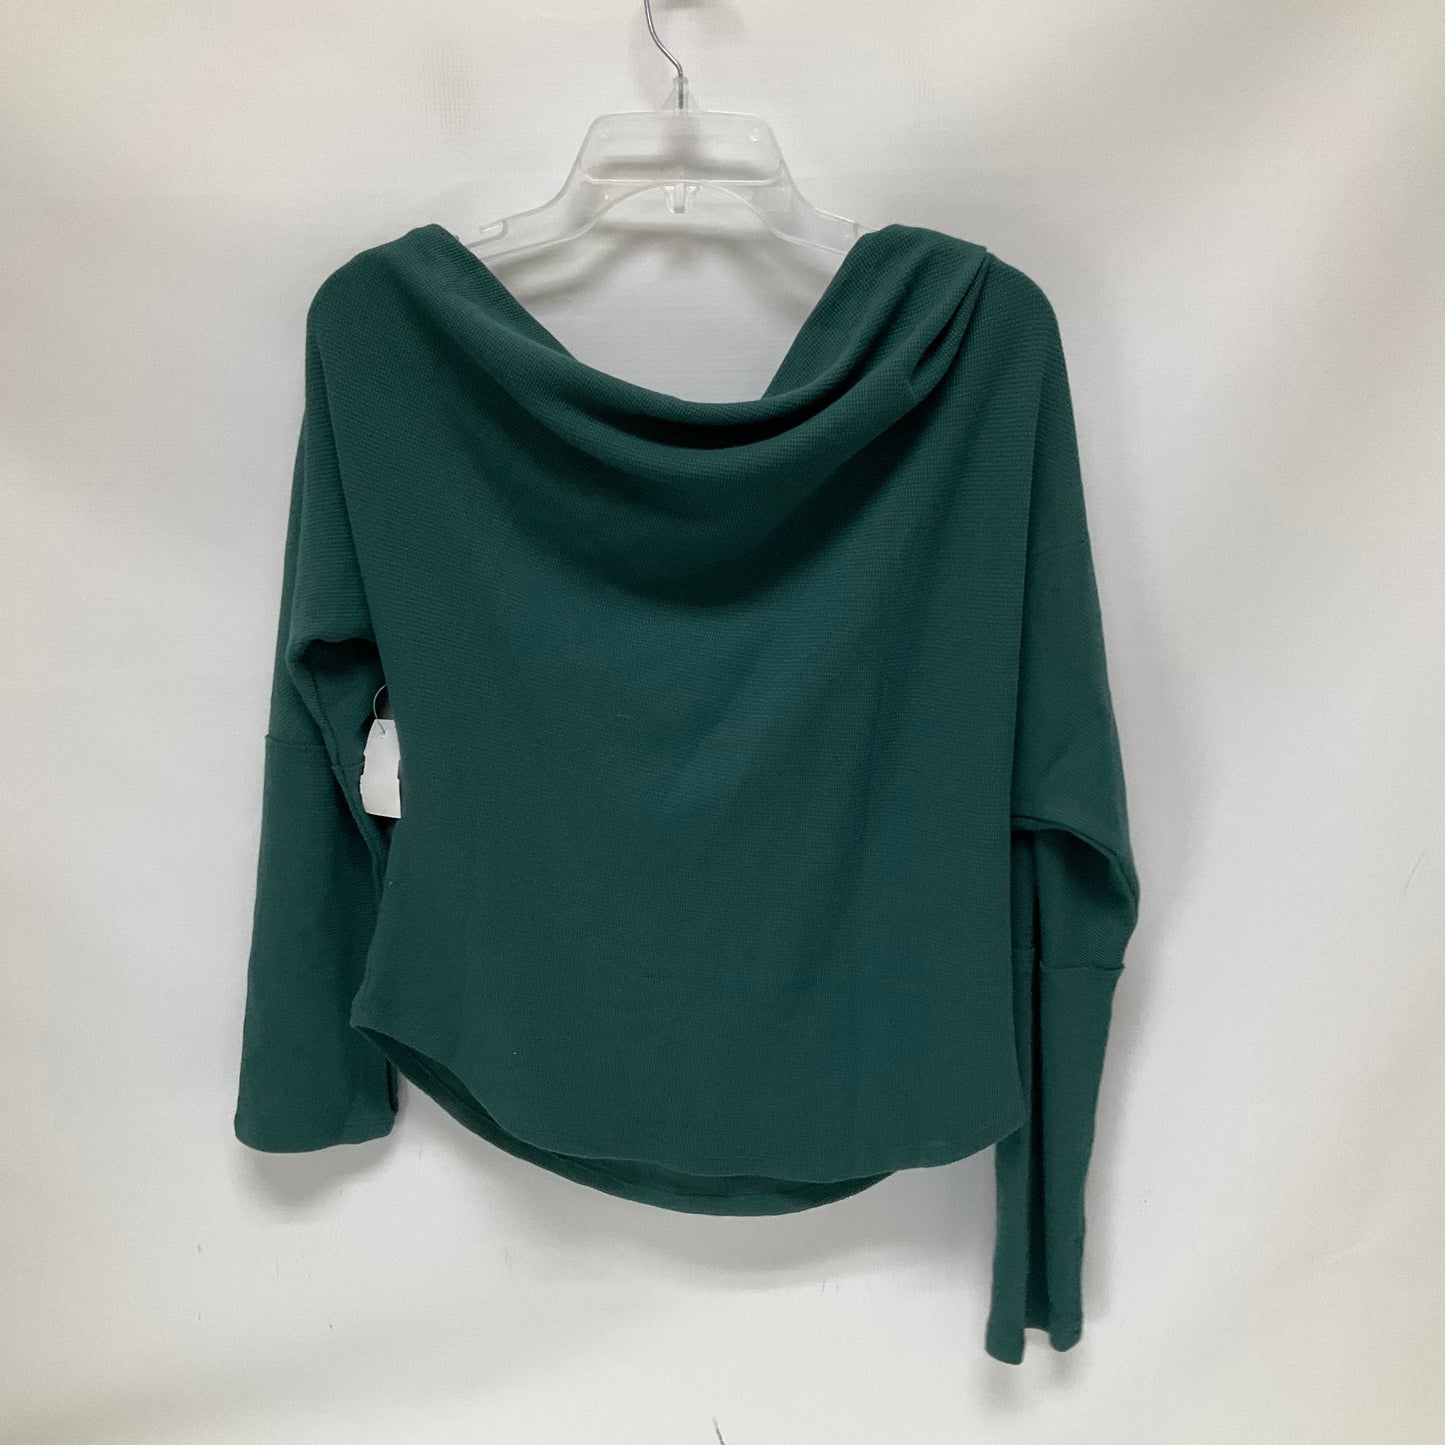 Green Top Long Sleeve Free People, Size Xl